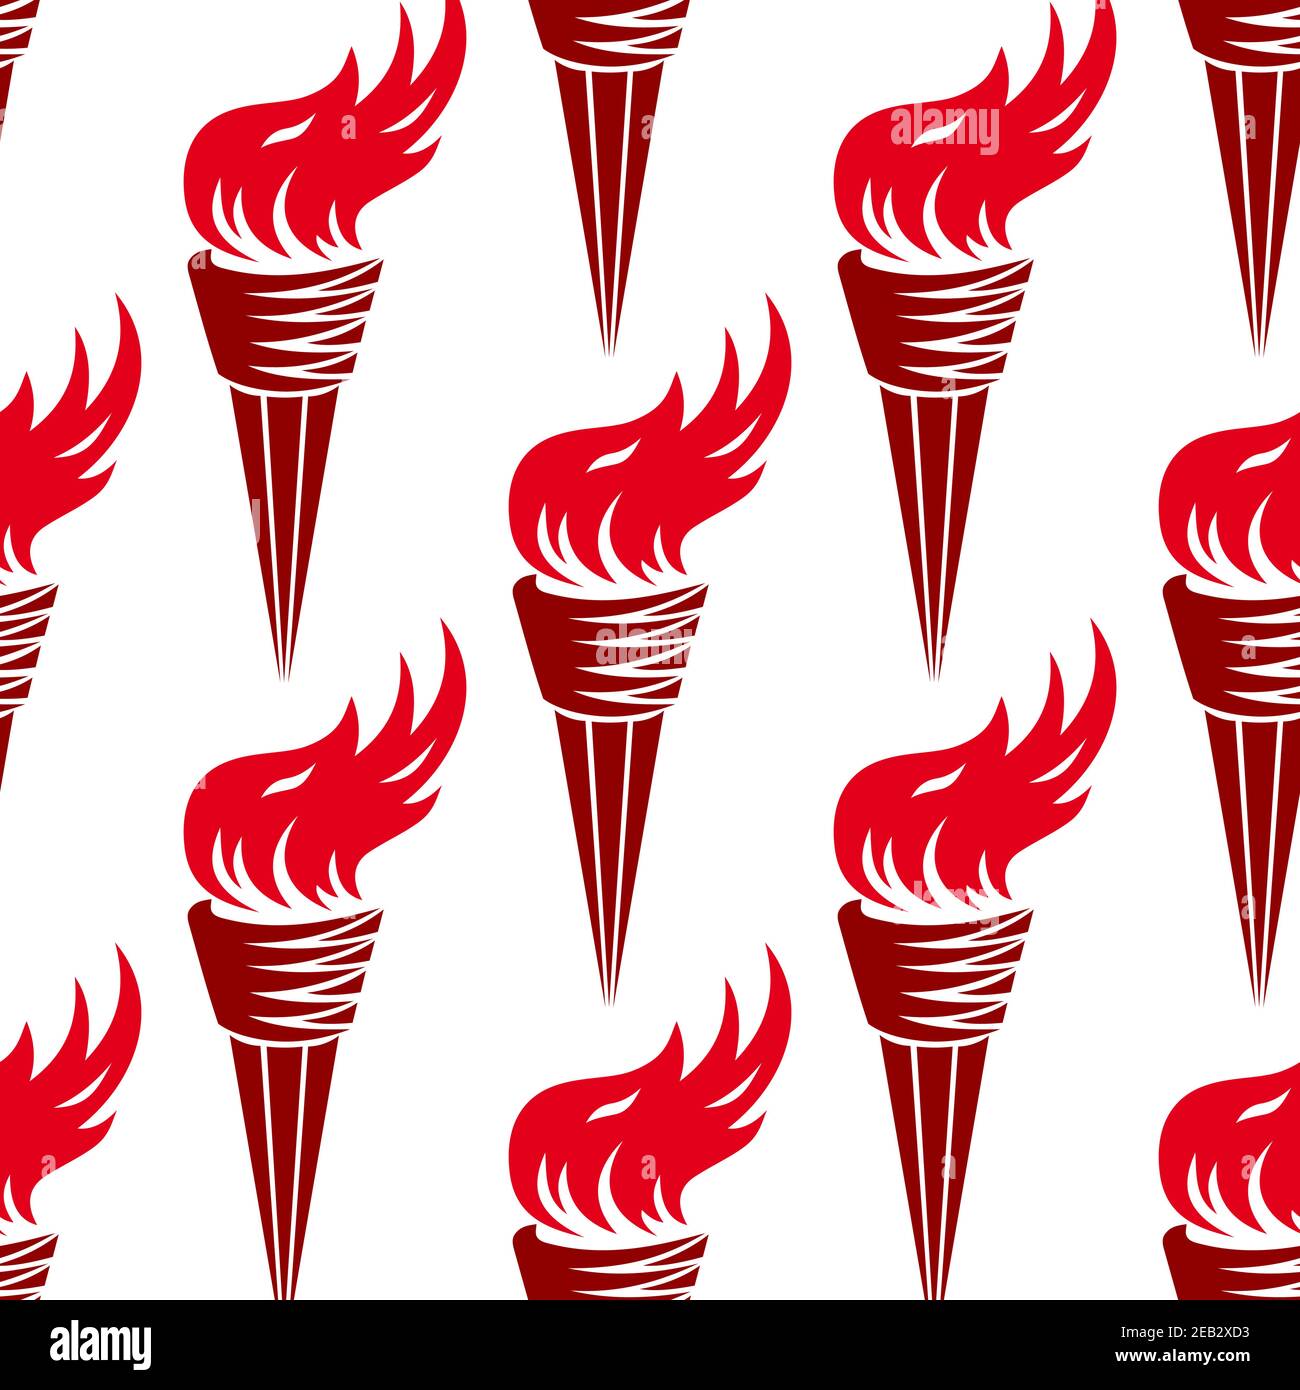 Seamless ancient greek burning torches pattern with bright red fire flames and conical handle on white background for sporting competition or victory Stock Vector